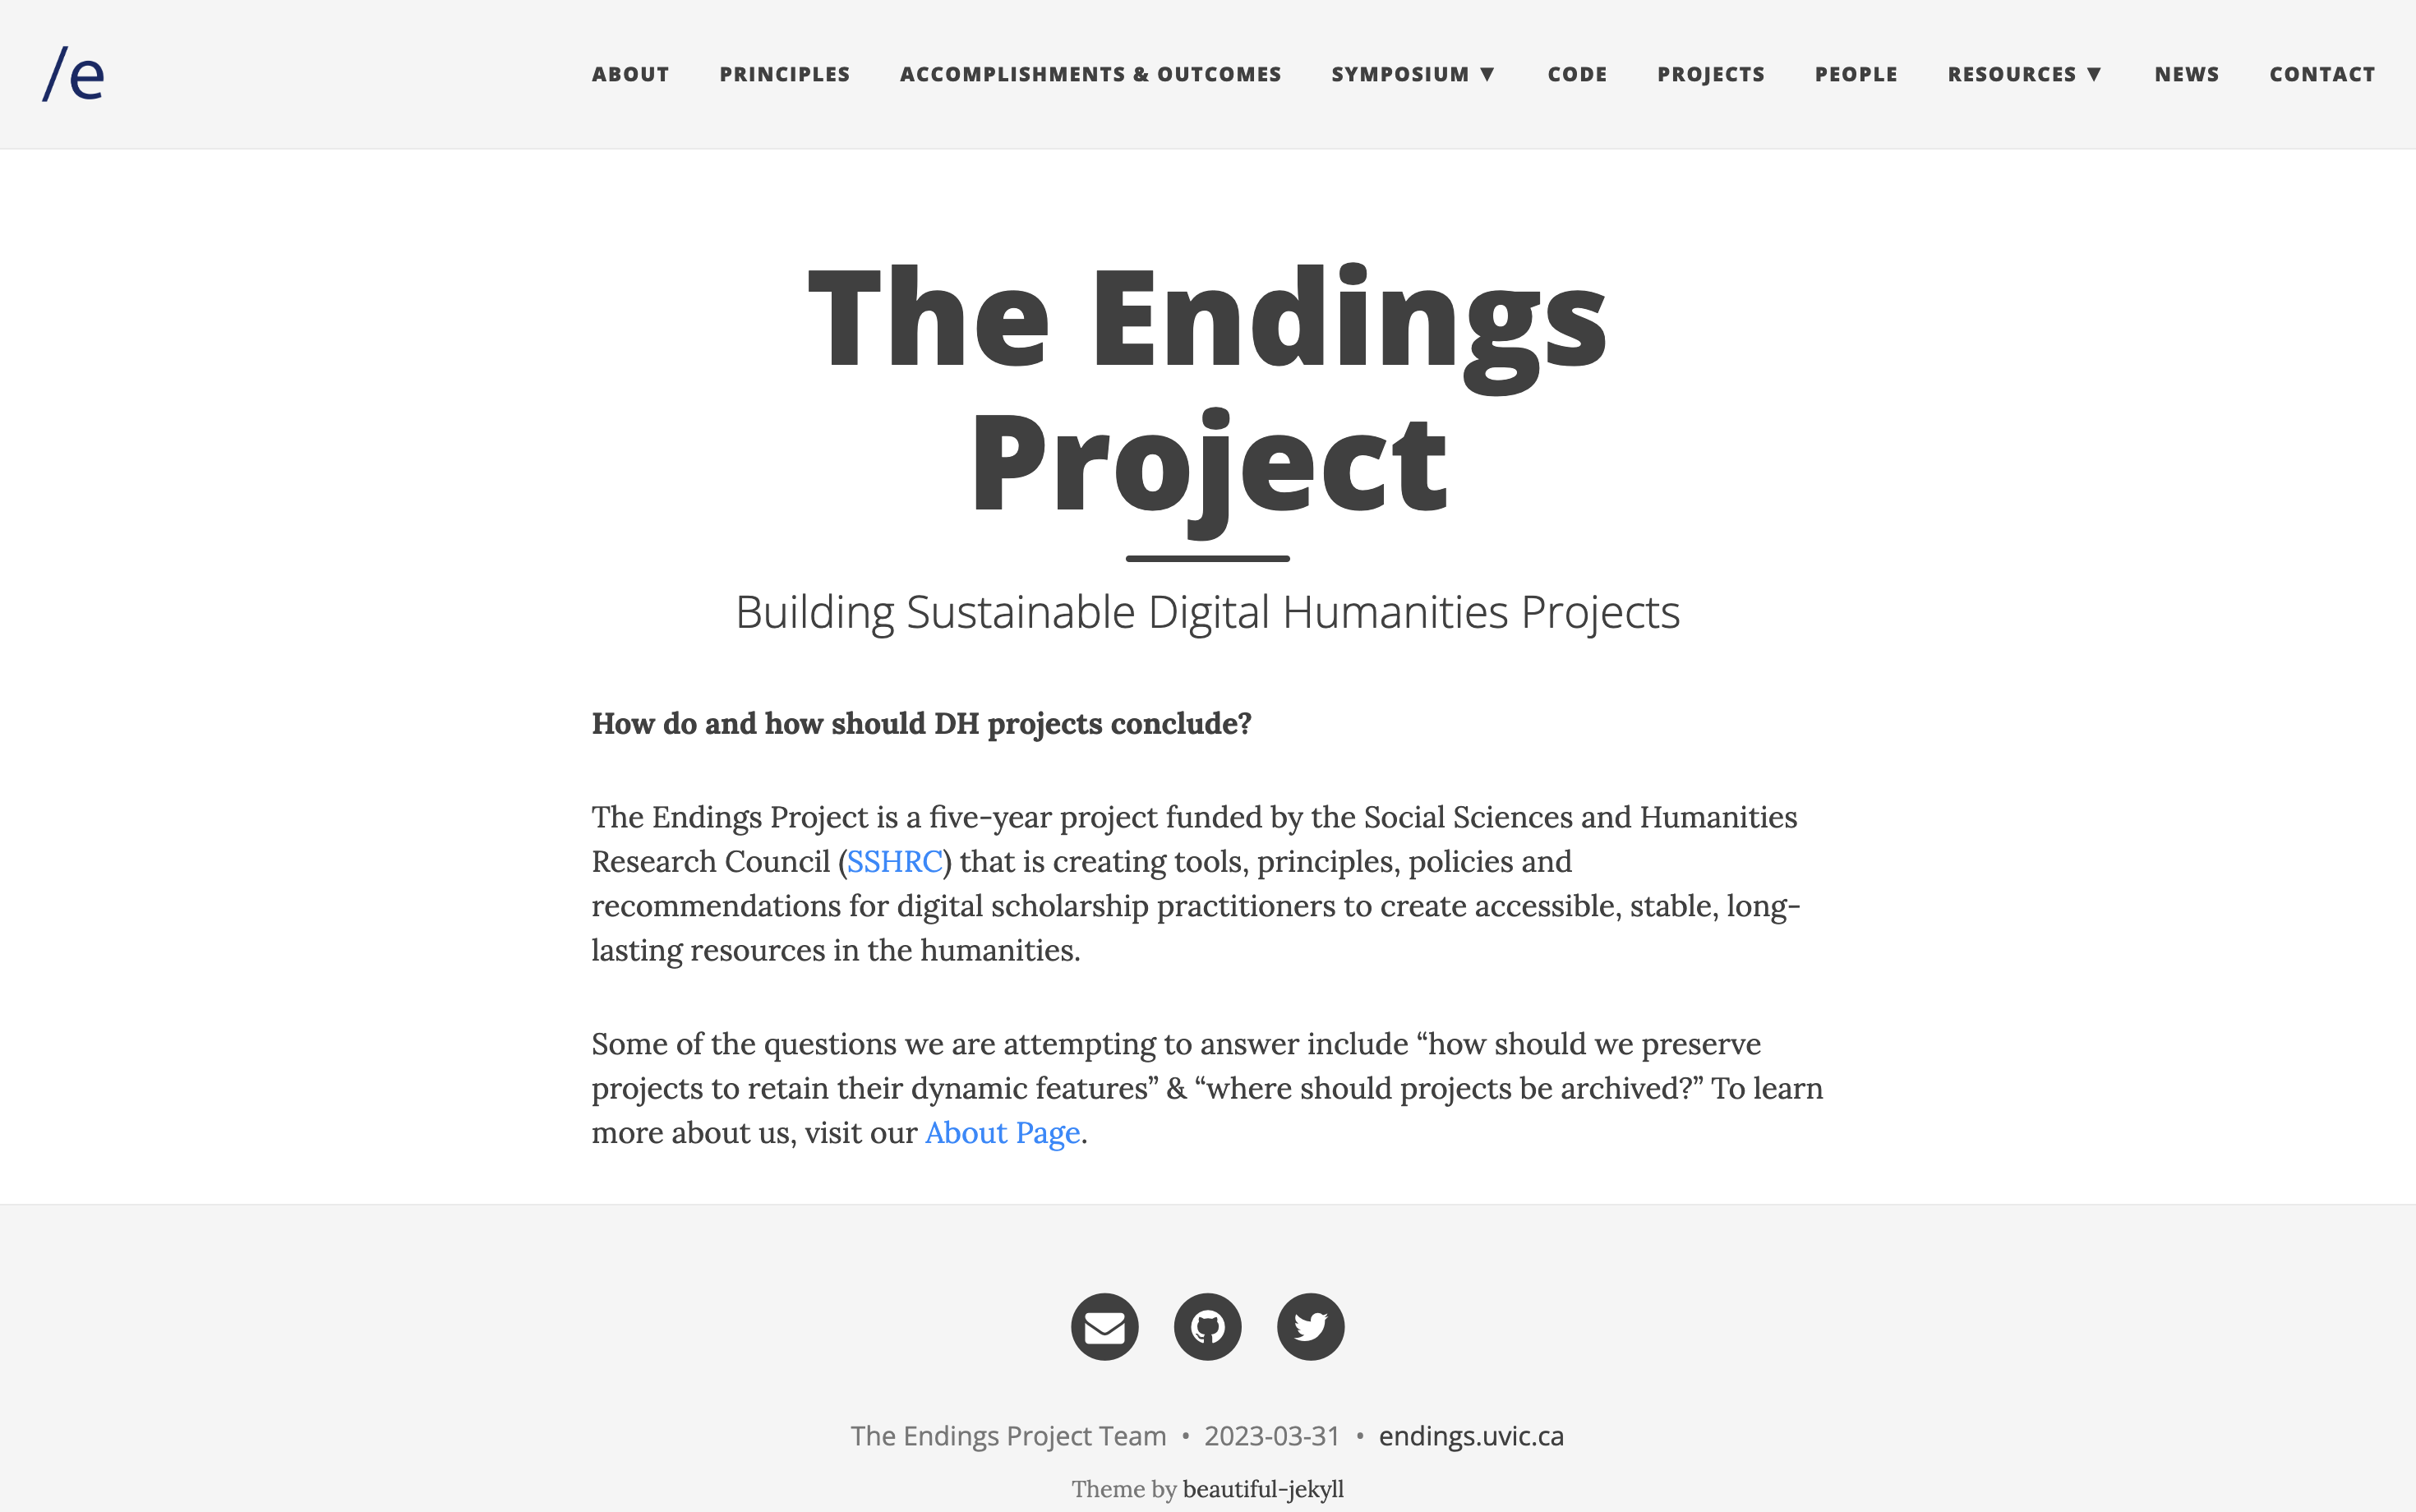 The Endings Project: Building Sustainable Digital Humanities Projects.